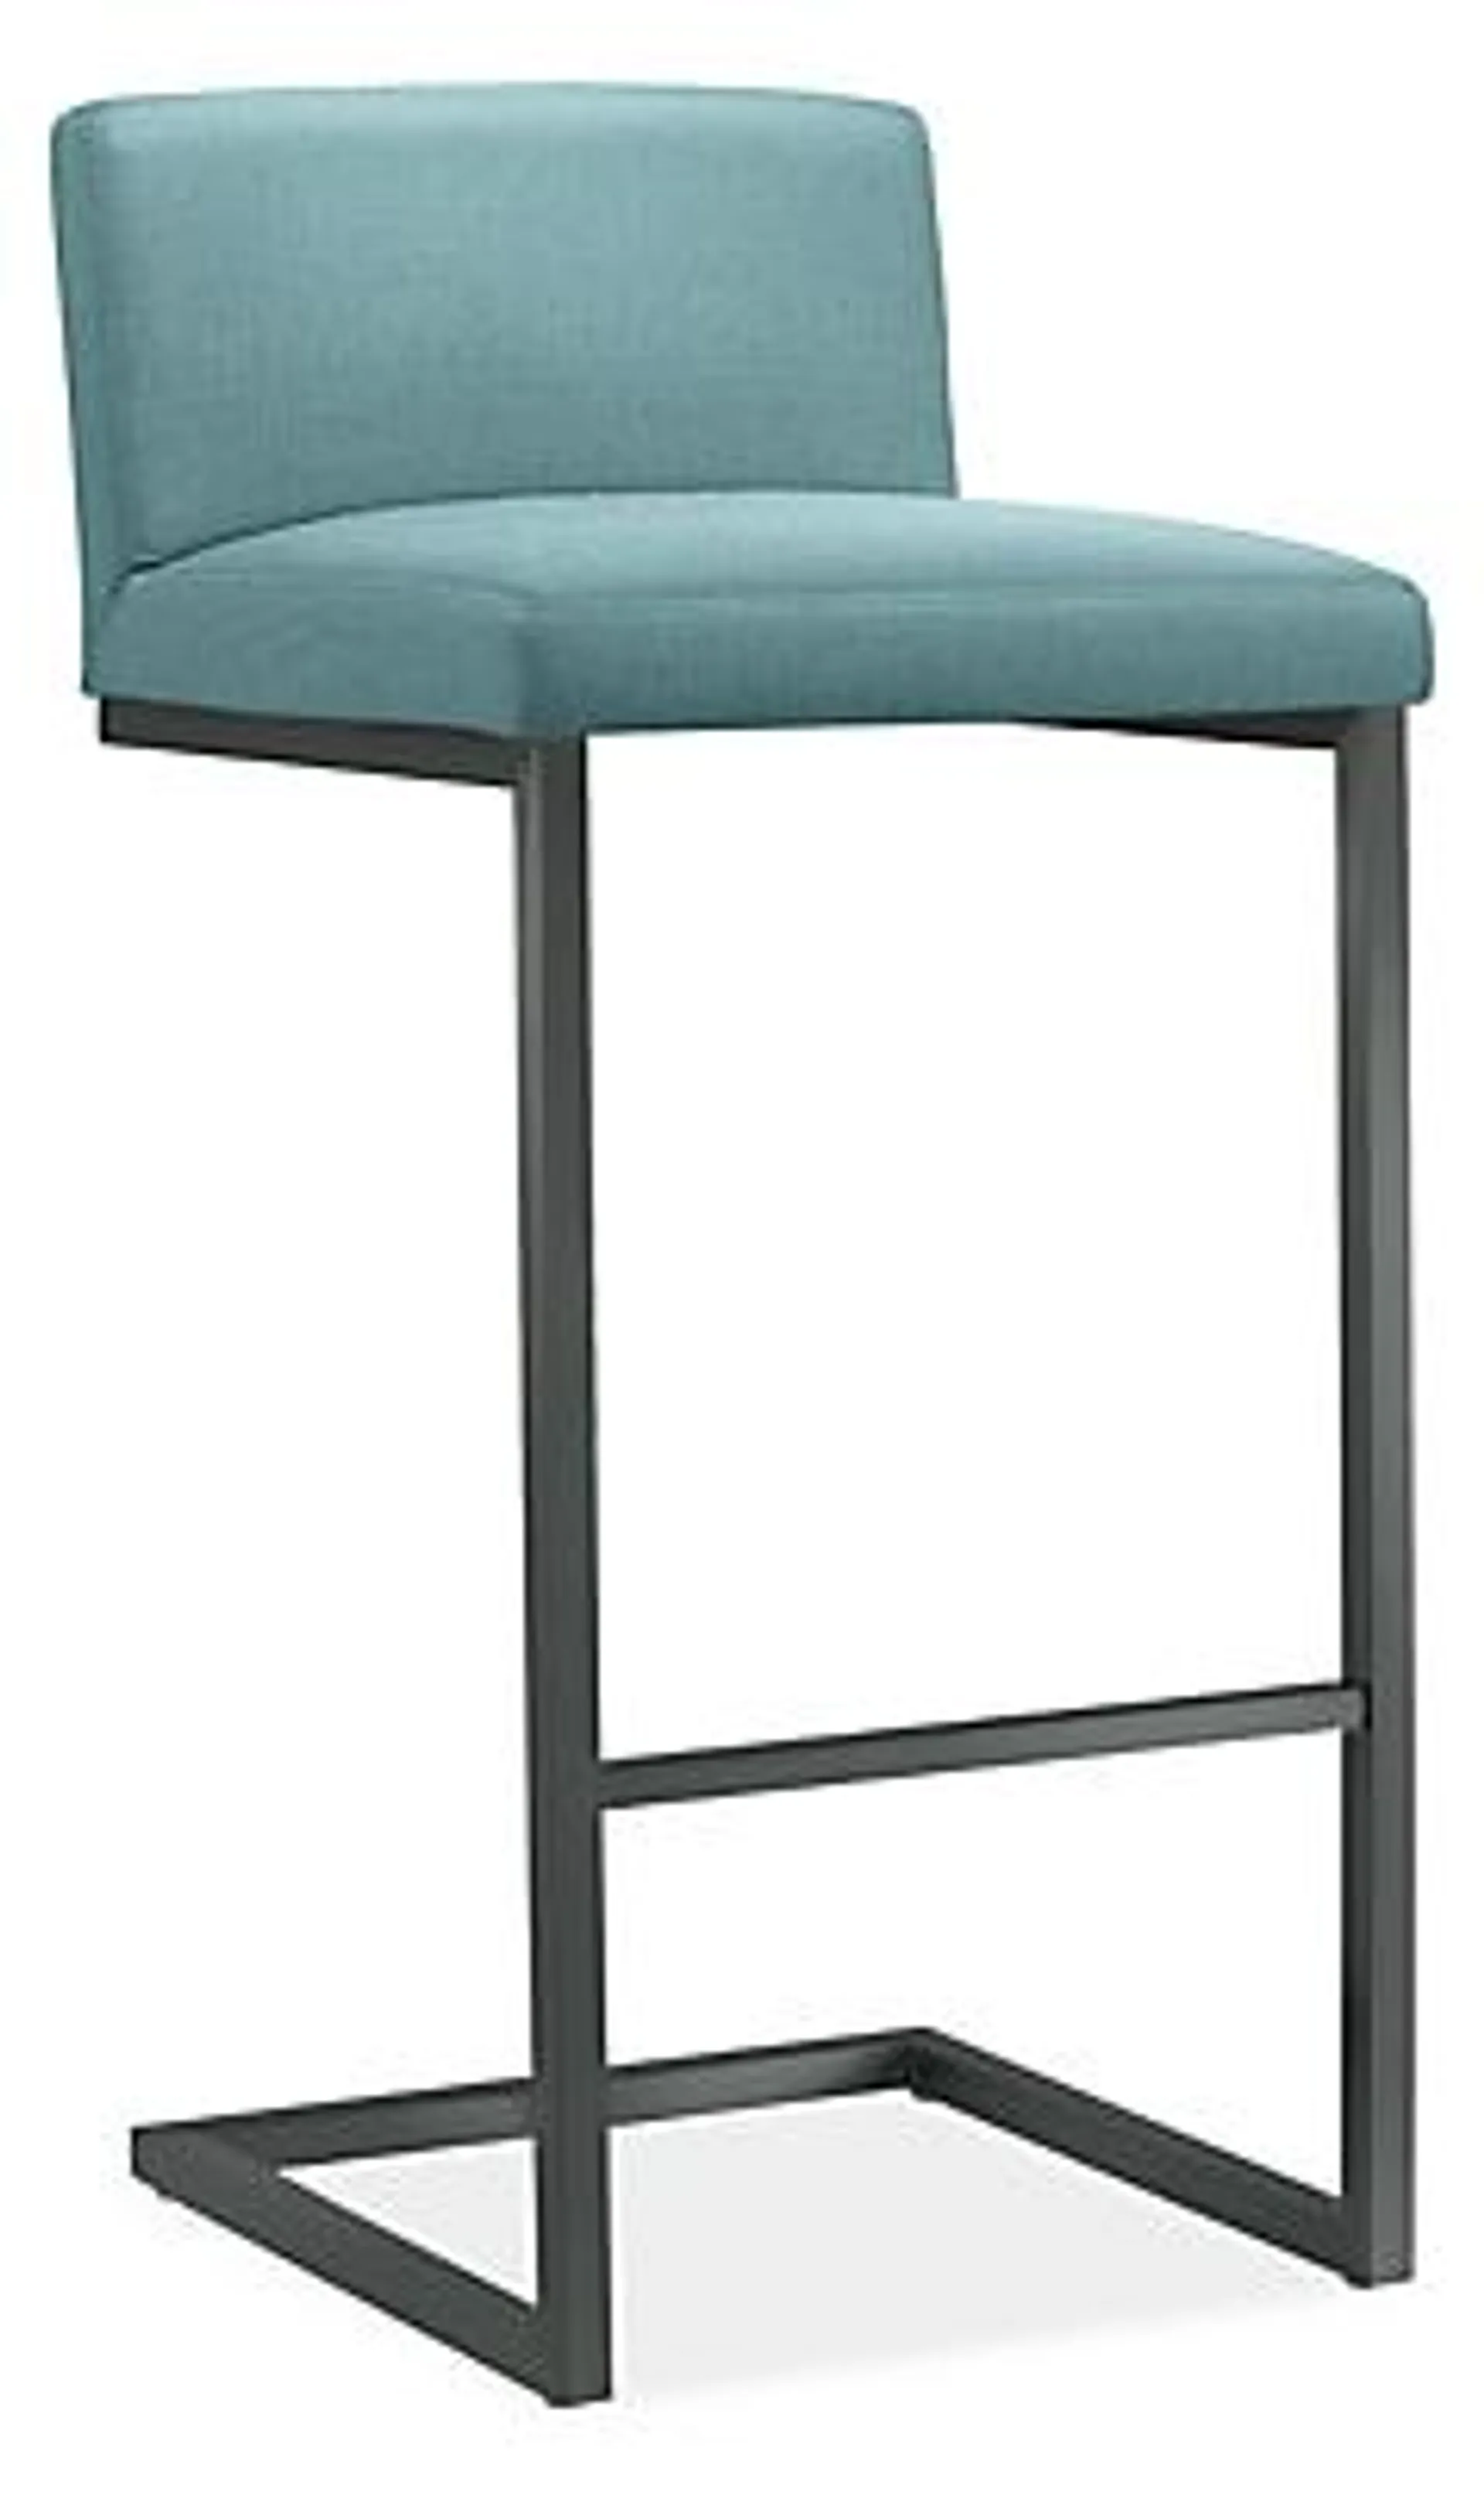 Finn Bar Stool in Corso Spa with Graphite Frame